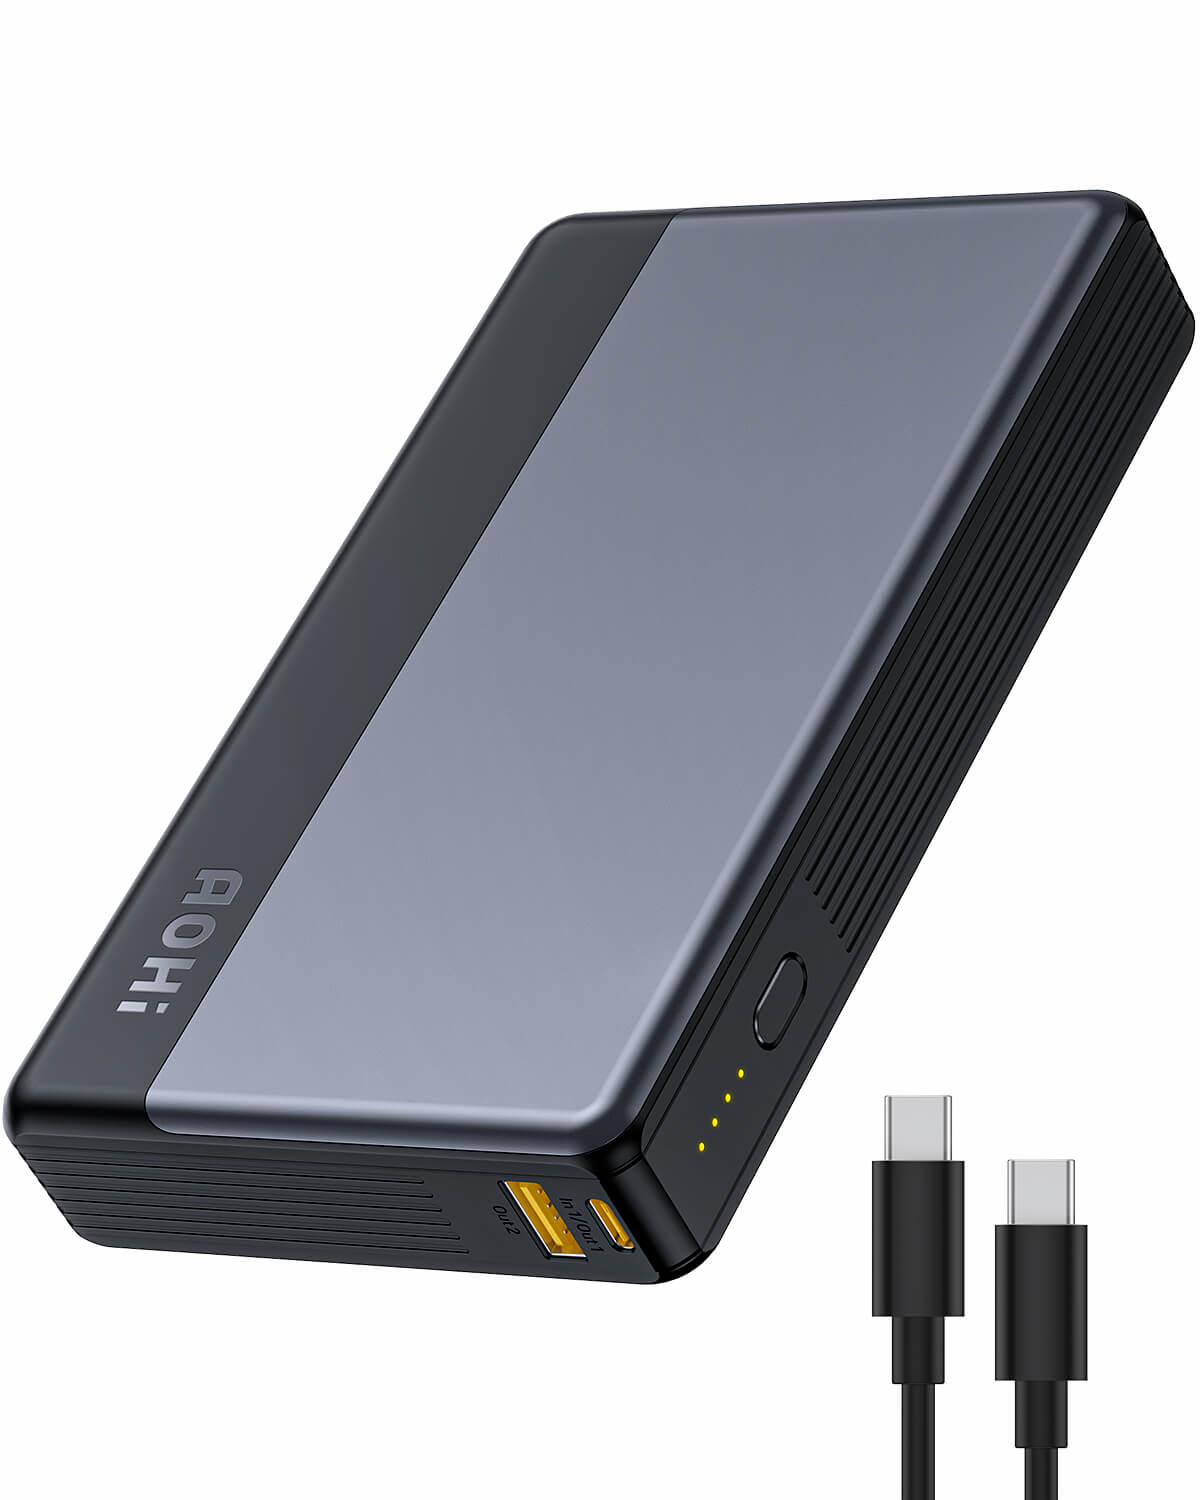 AOHI 30000mAh 100W Portable Laptop Power Bank with C-C Cable